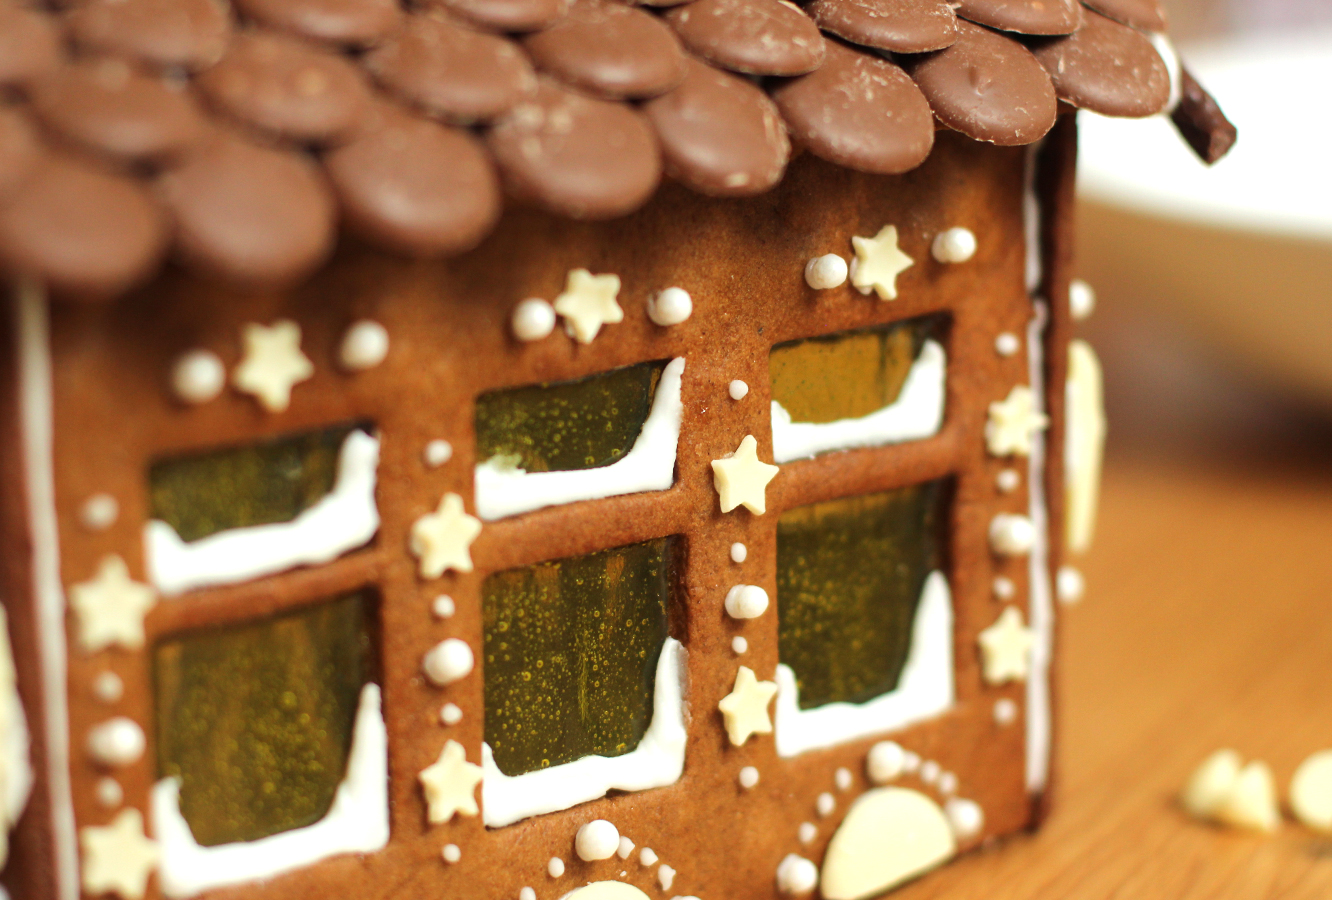 gingerbread-house-village-recipe-guide-19